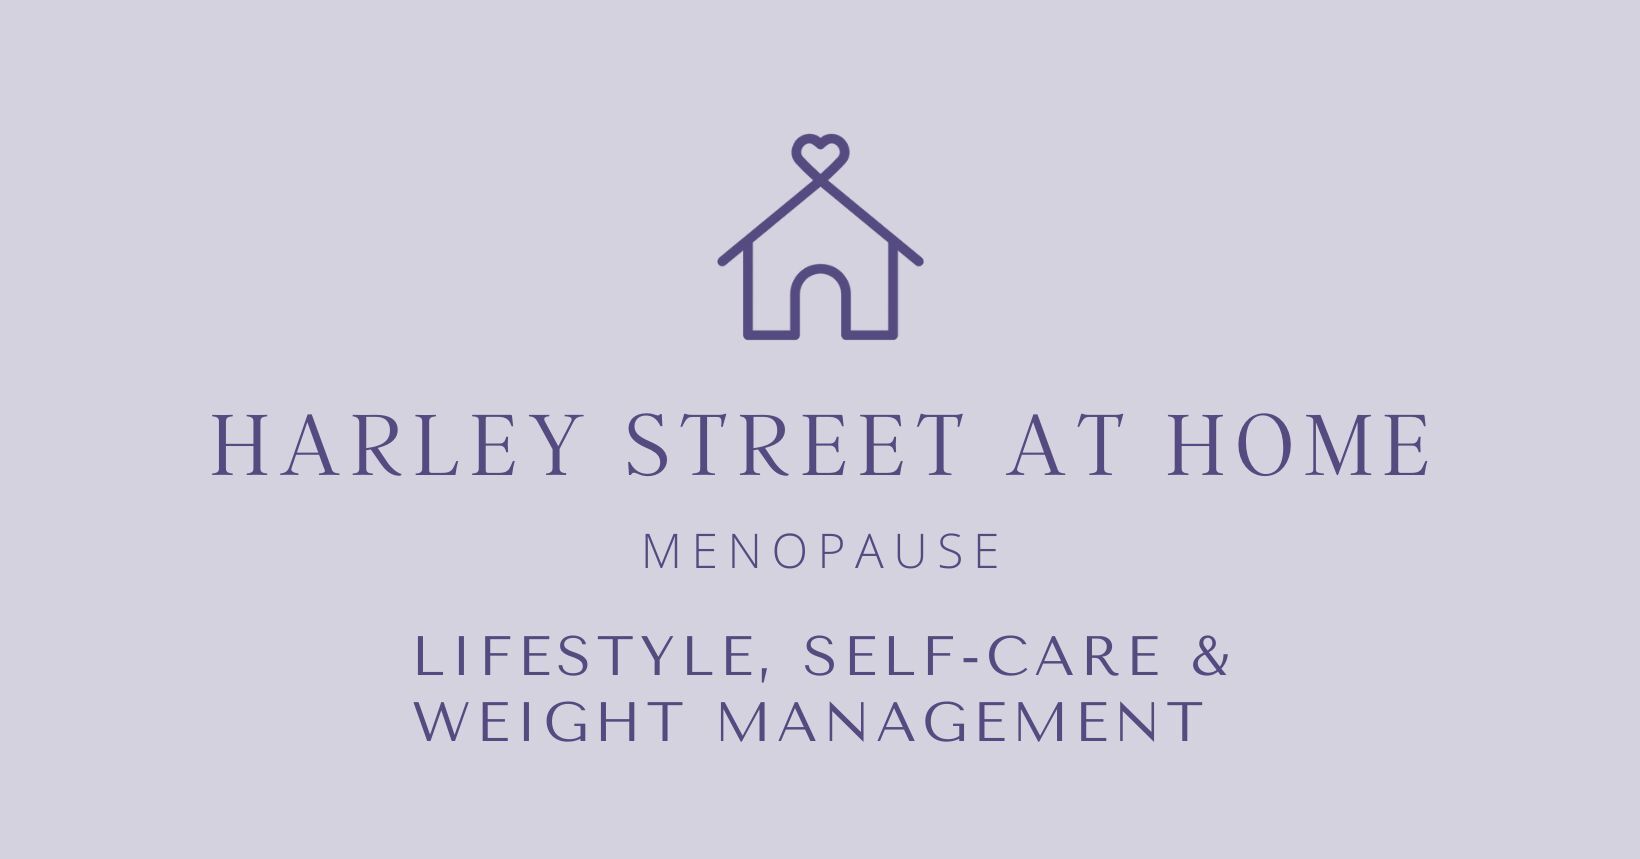 MENOPAUSE LIFESTYLE, SELF-CARE & WEIGHT MANAGEMENT